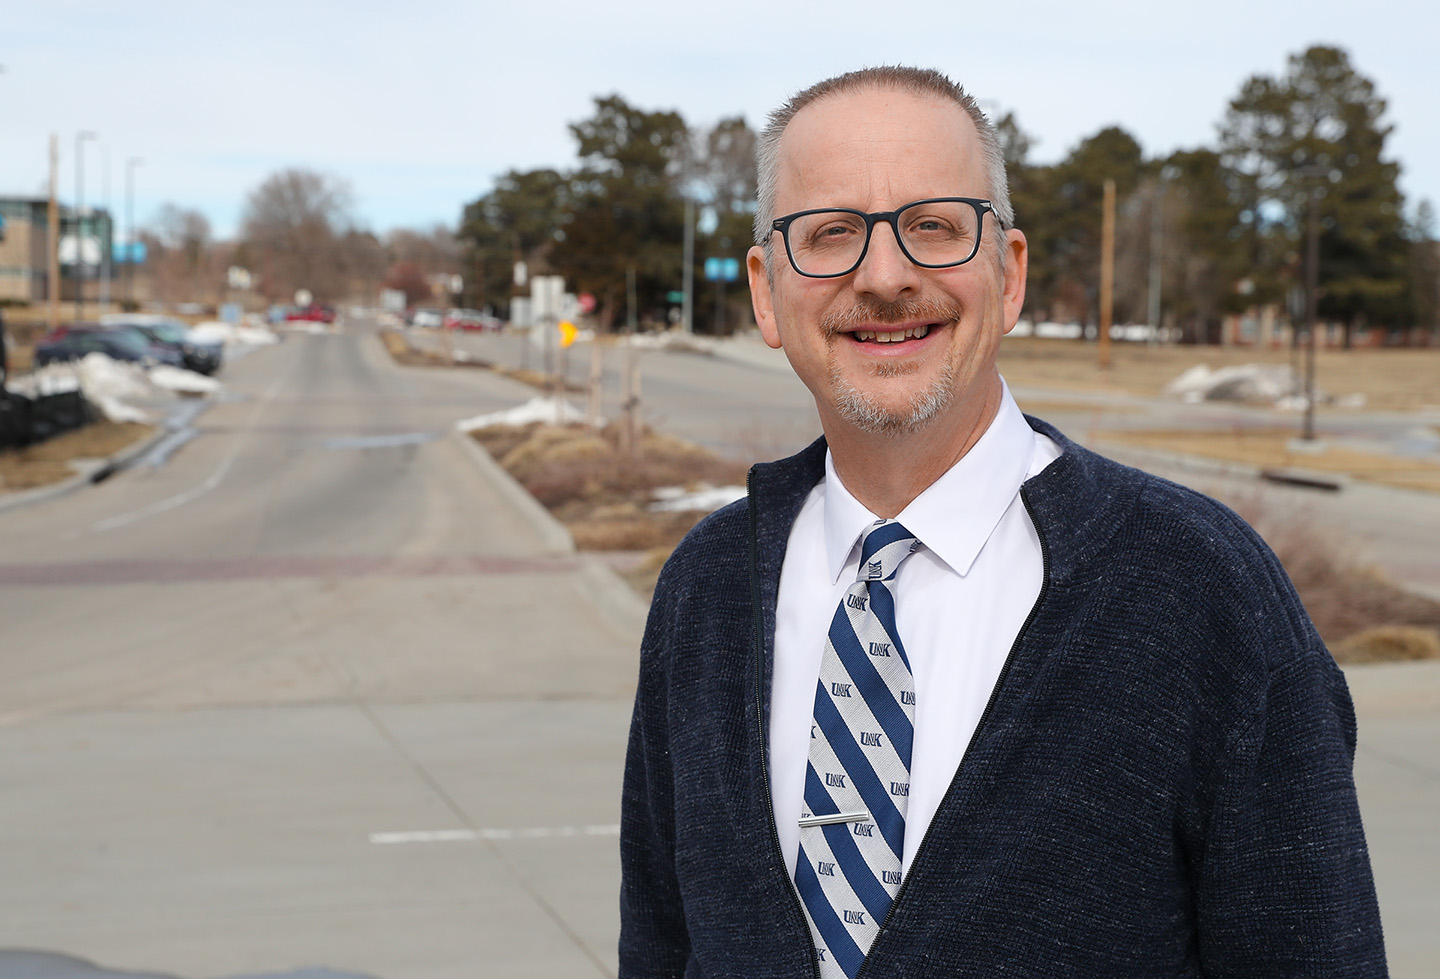 UNK chemistry professor Chris Exstrom is part of a research team that will study ways to improve recycled concrete while lowering carbon dioxide levels in the atmosphere. (Photos by Erika Pritchard, UNK Communications)